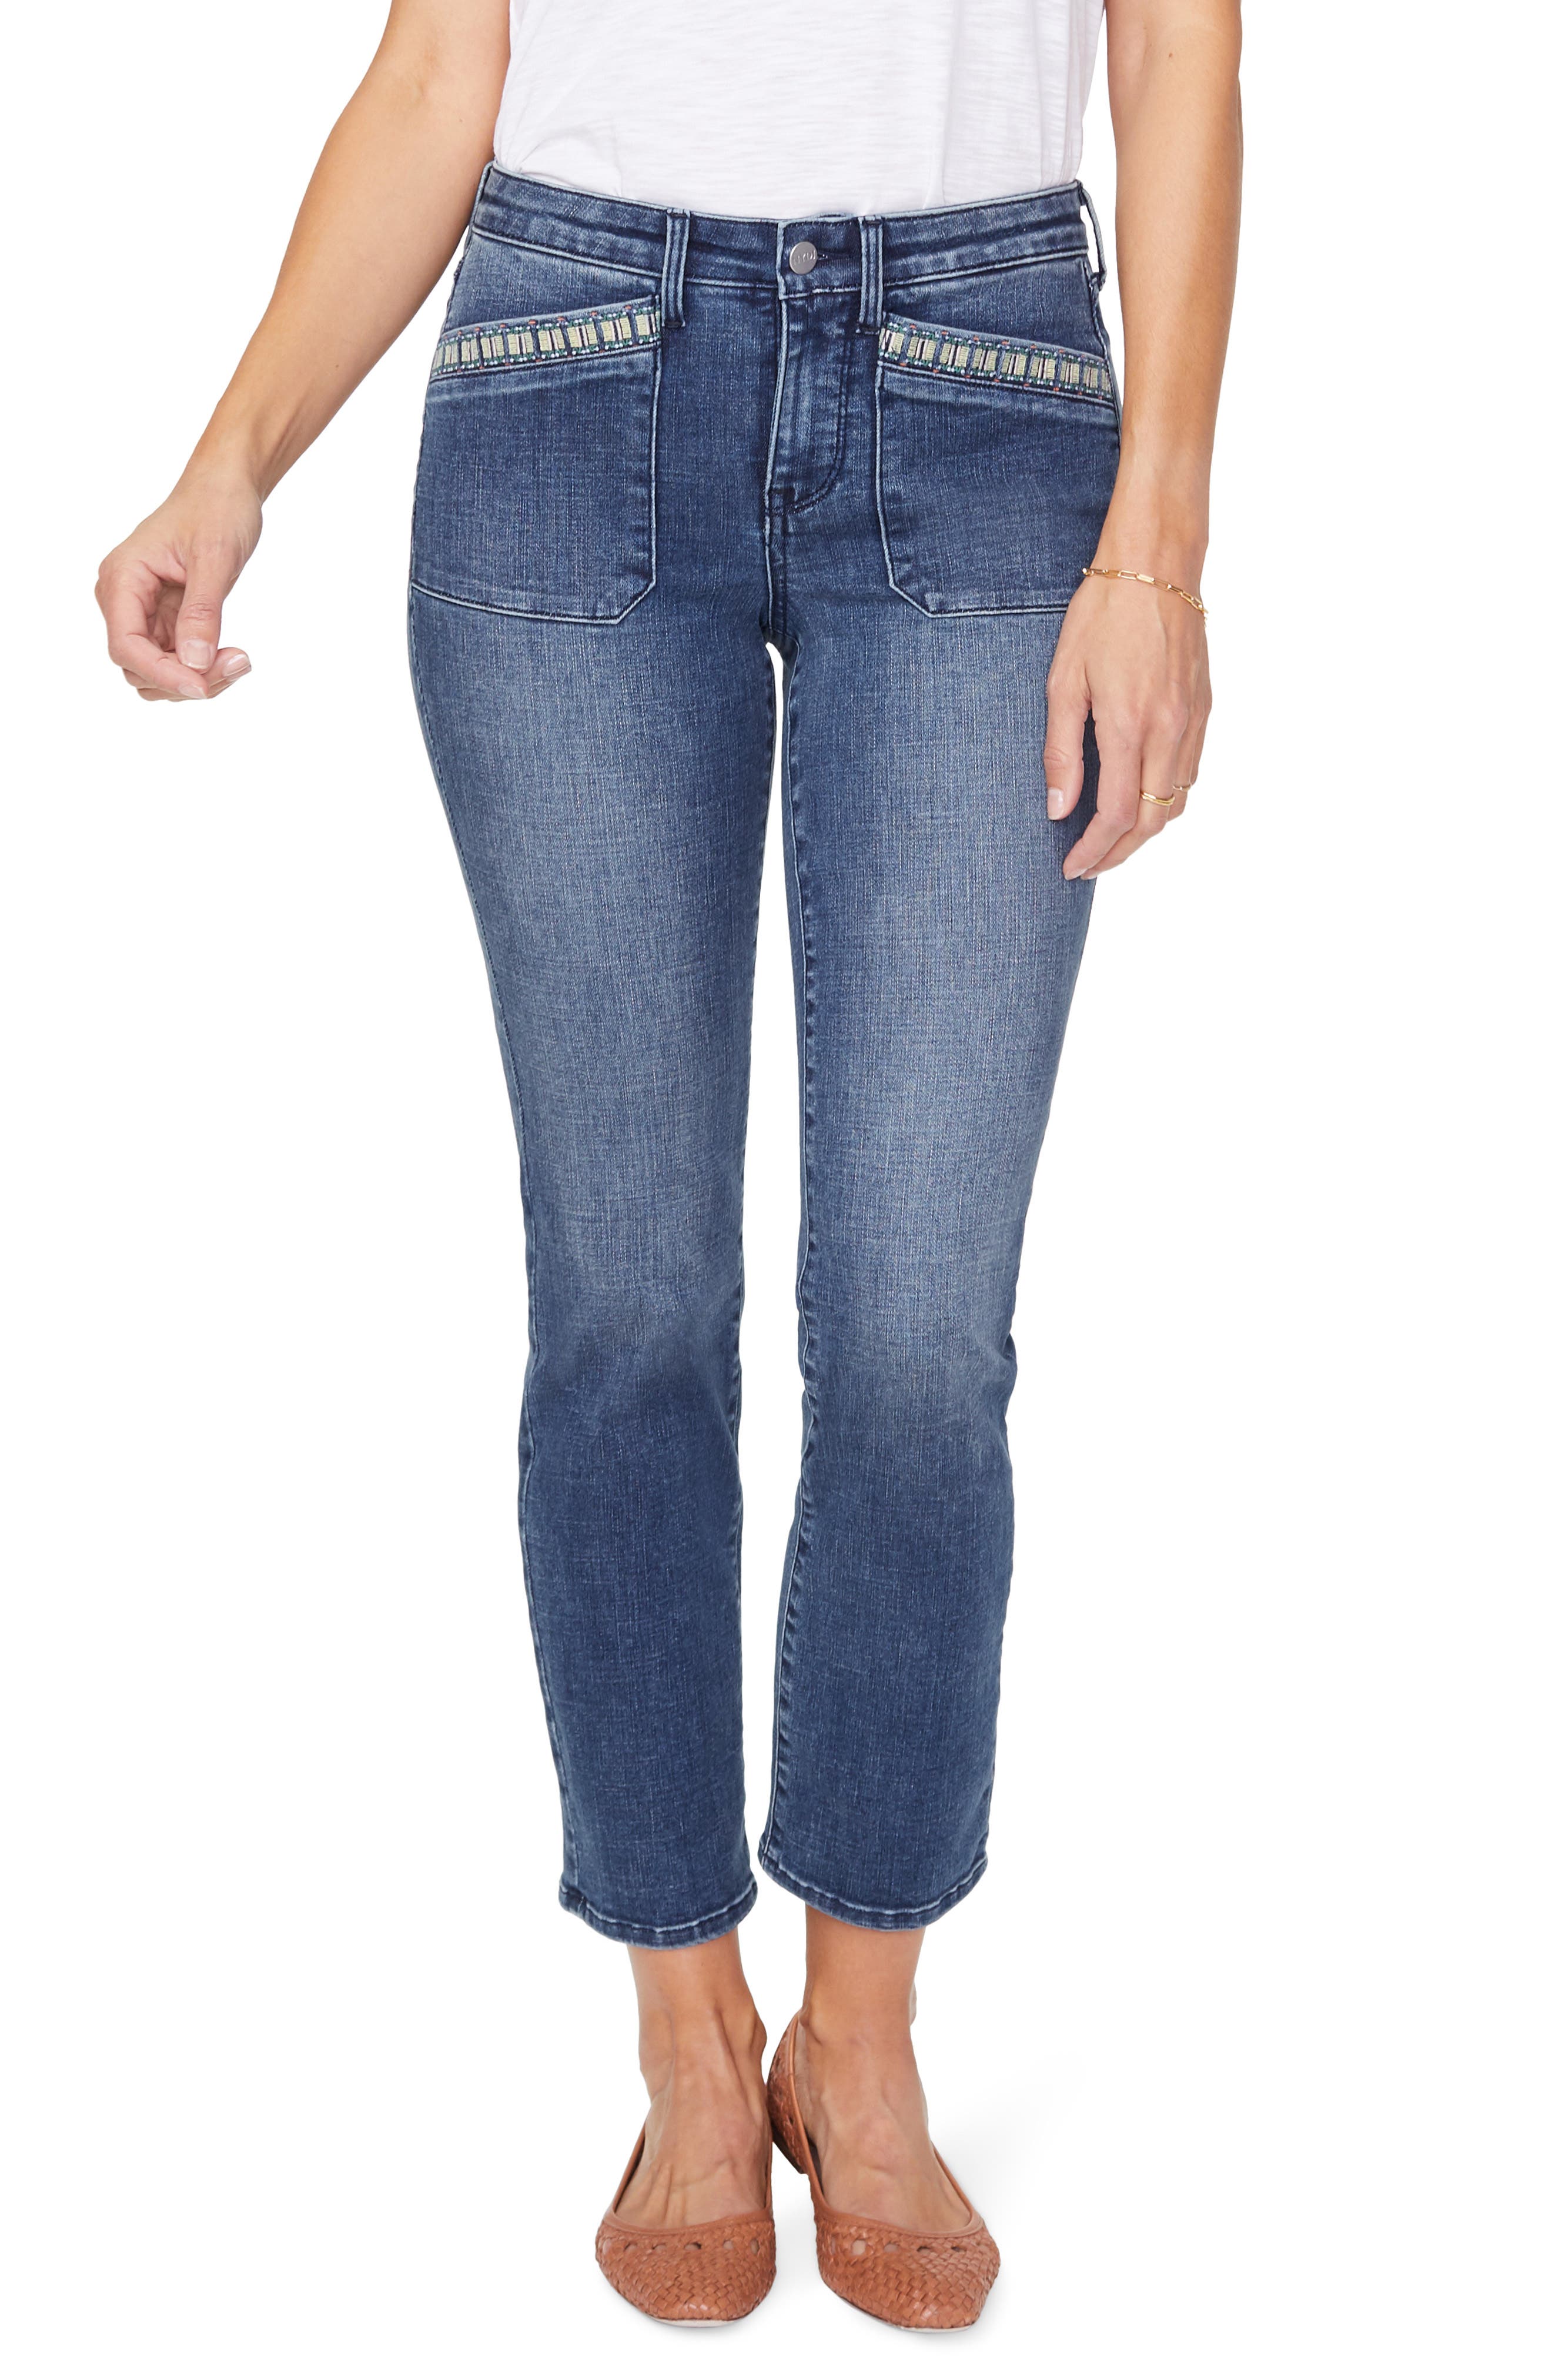 women's embroidered jeans sale